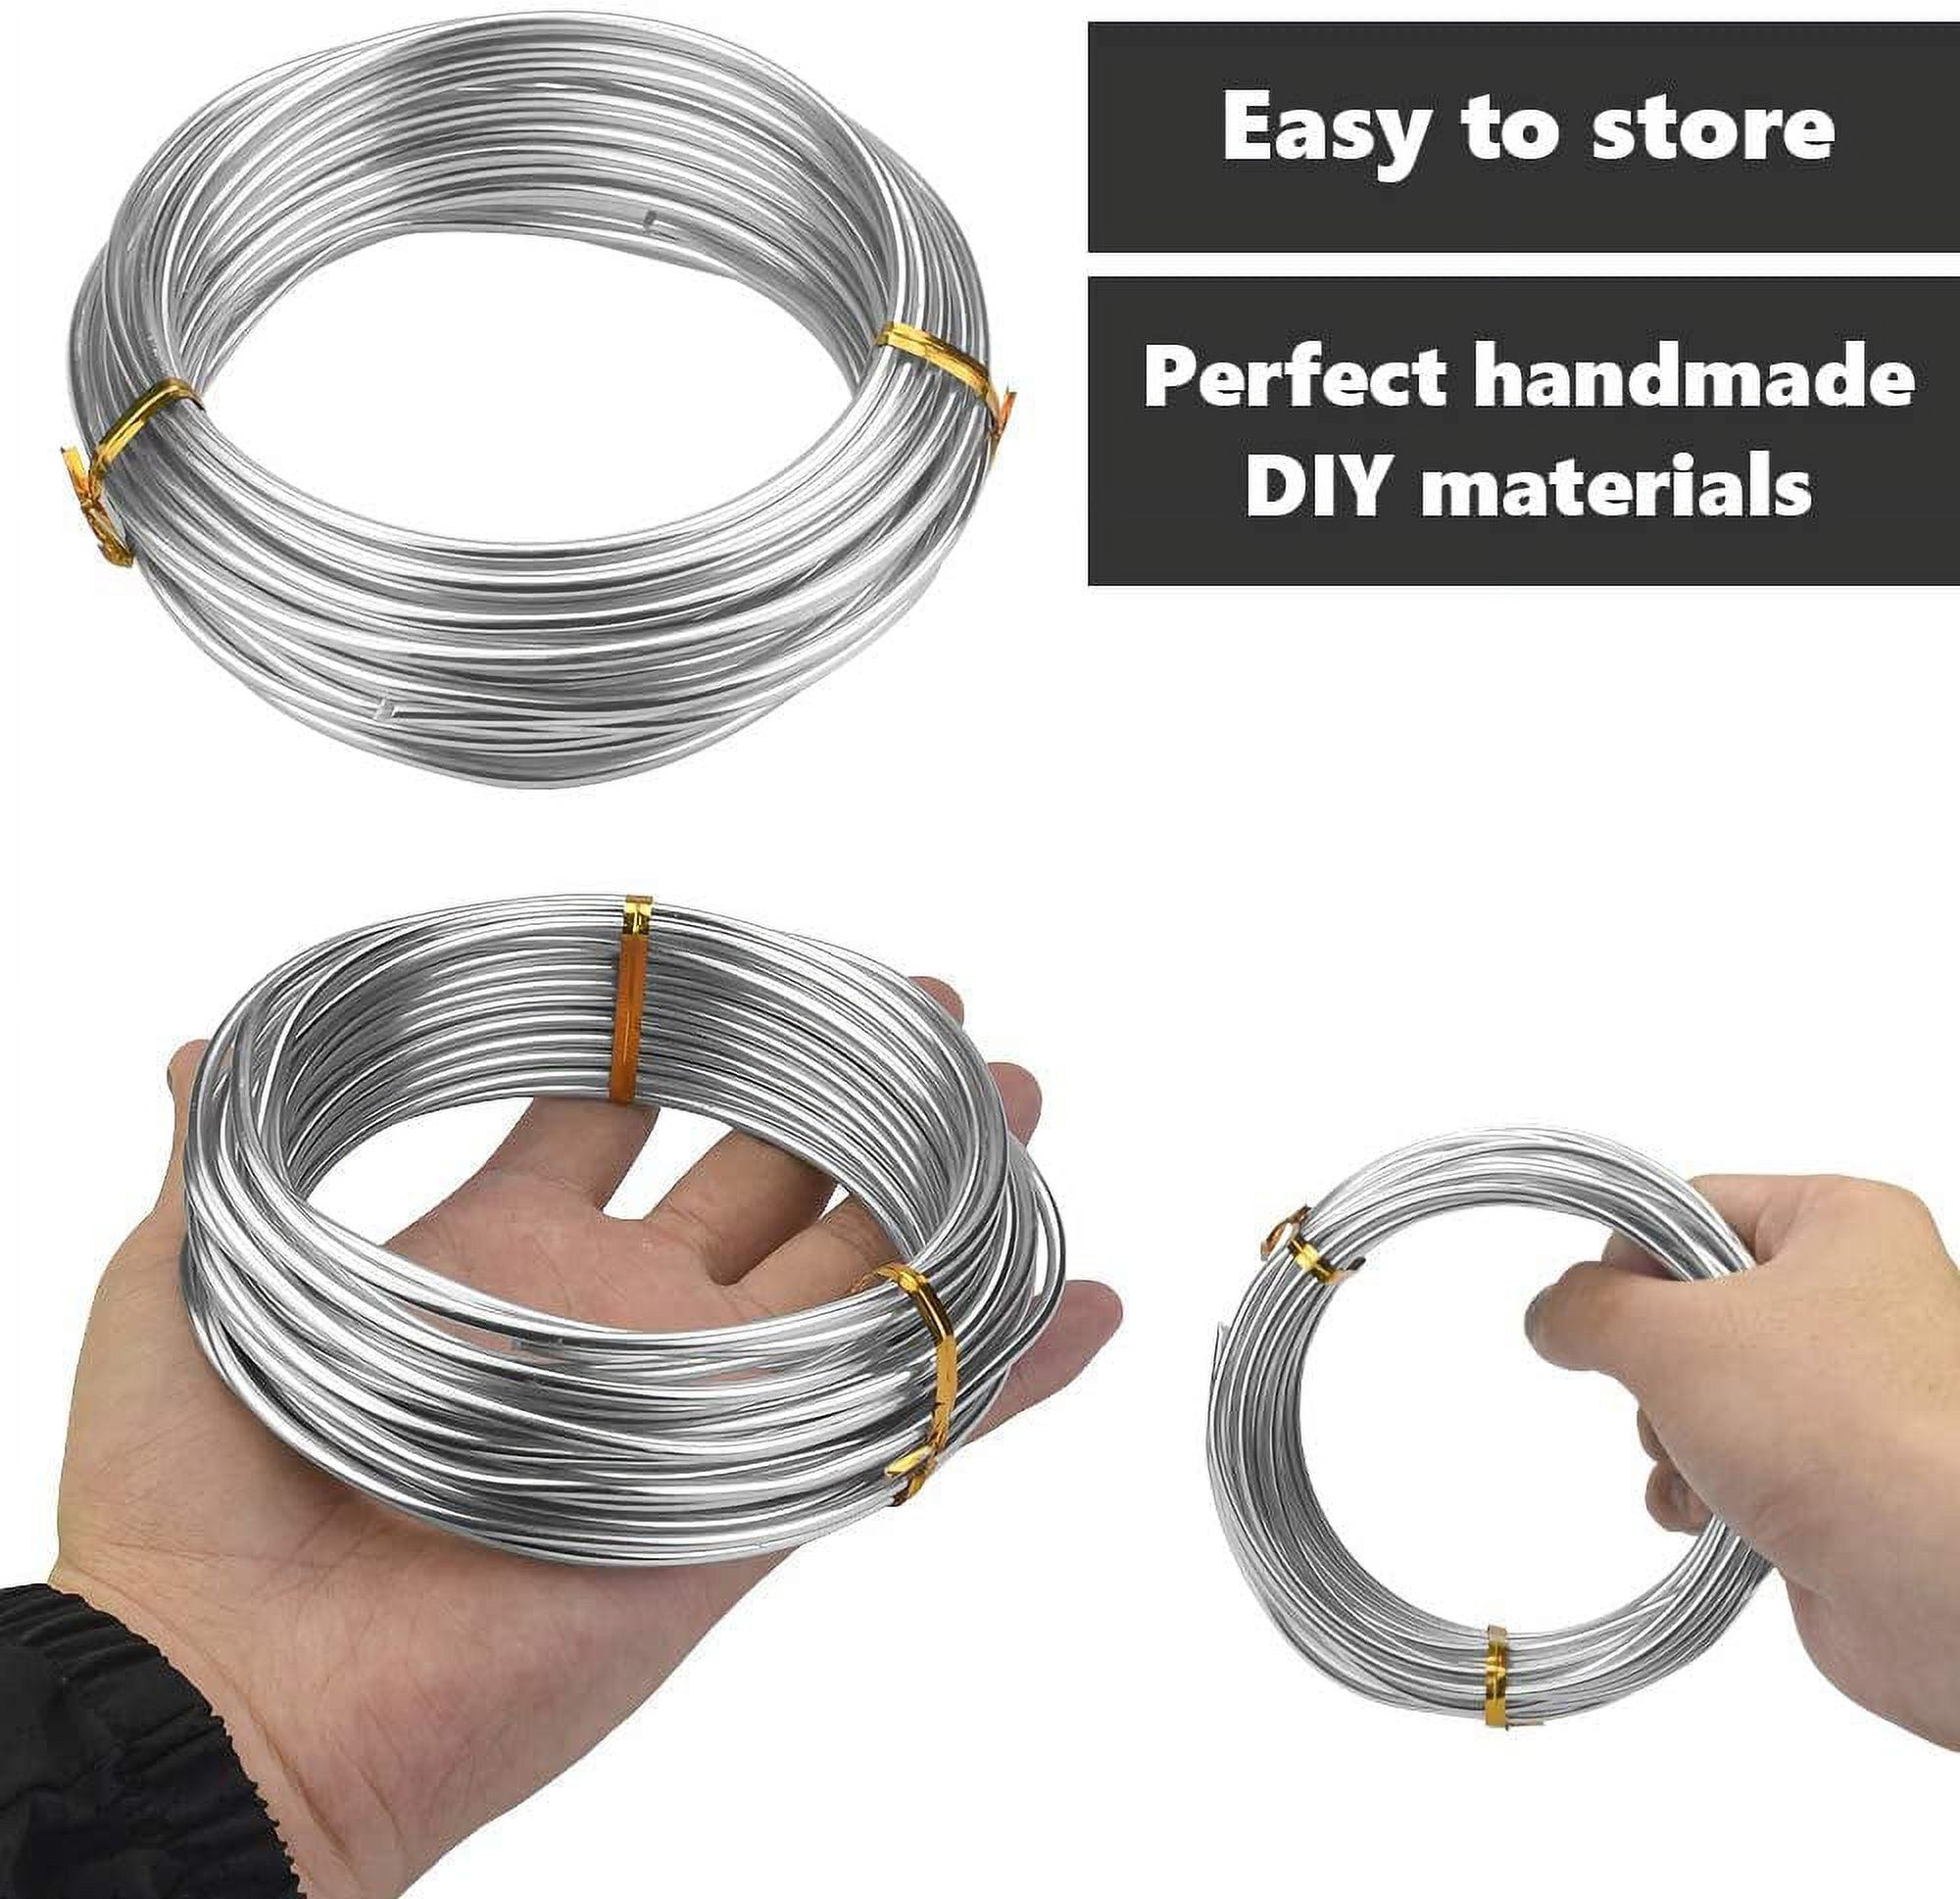 BENECREAT 9 Gauge (3mm) Transparent PVC Plastic Covered Aluminum Wire 100FT  Bendable Aluminum Craft Wire for Making Clothing, Hats, Head wear, DIY  Crafts 